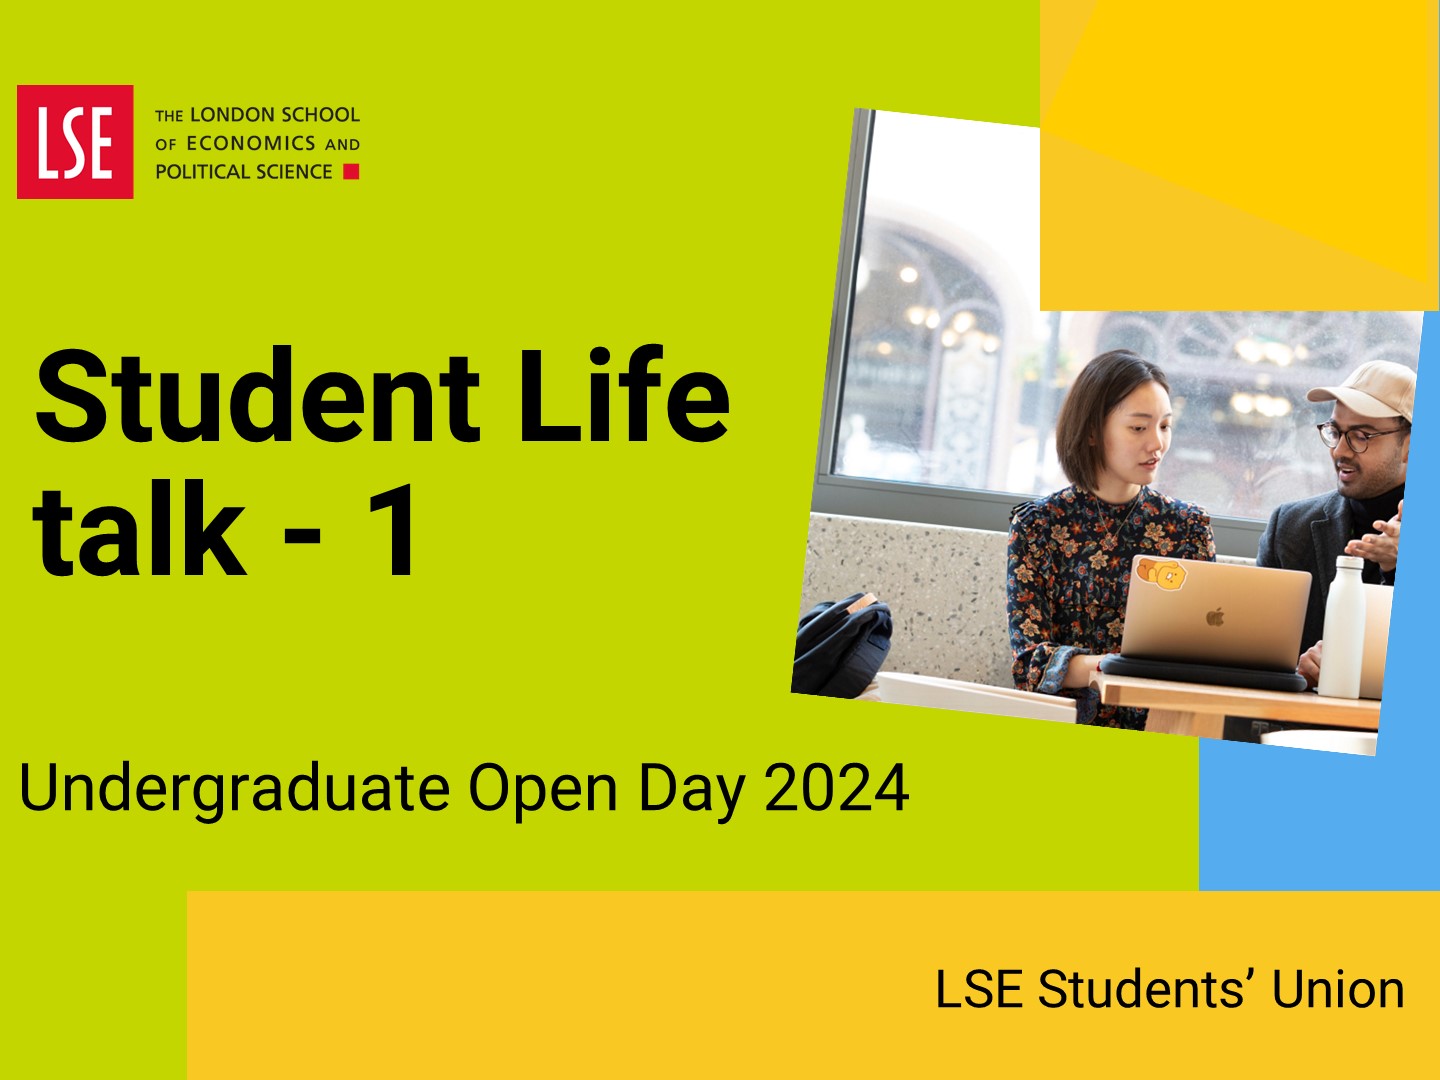 Student Life: a presentation by the SRSA team followed by a Q&A with LSE students